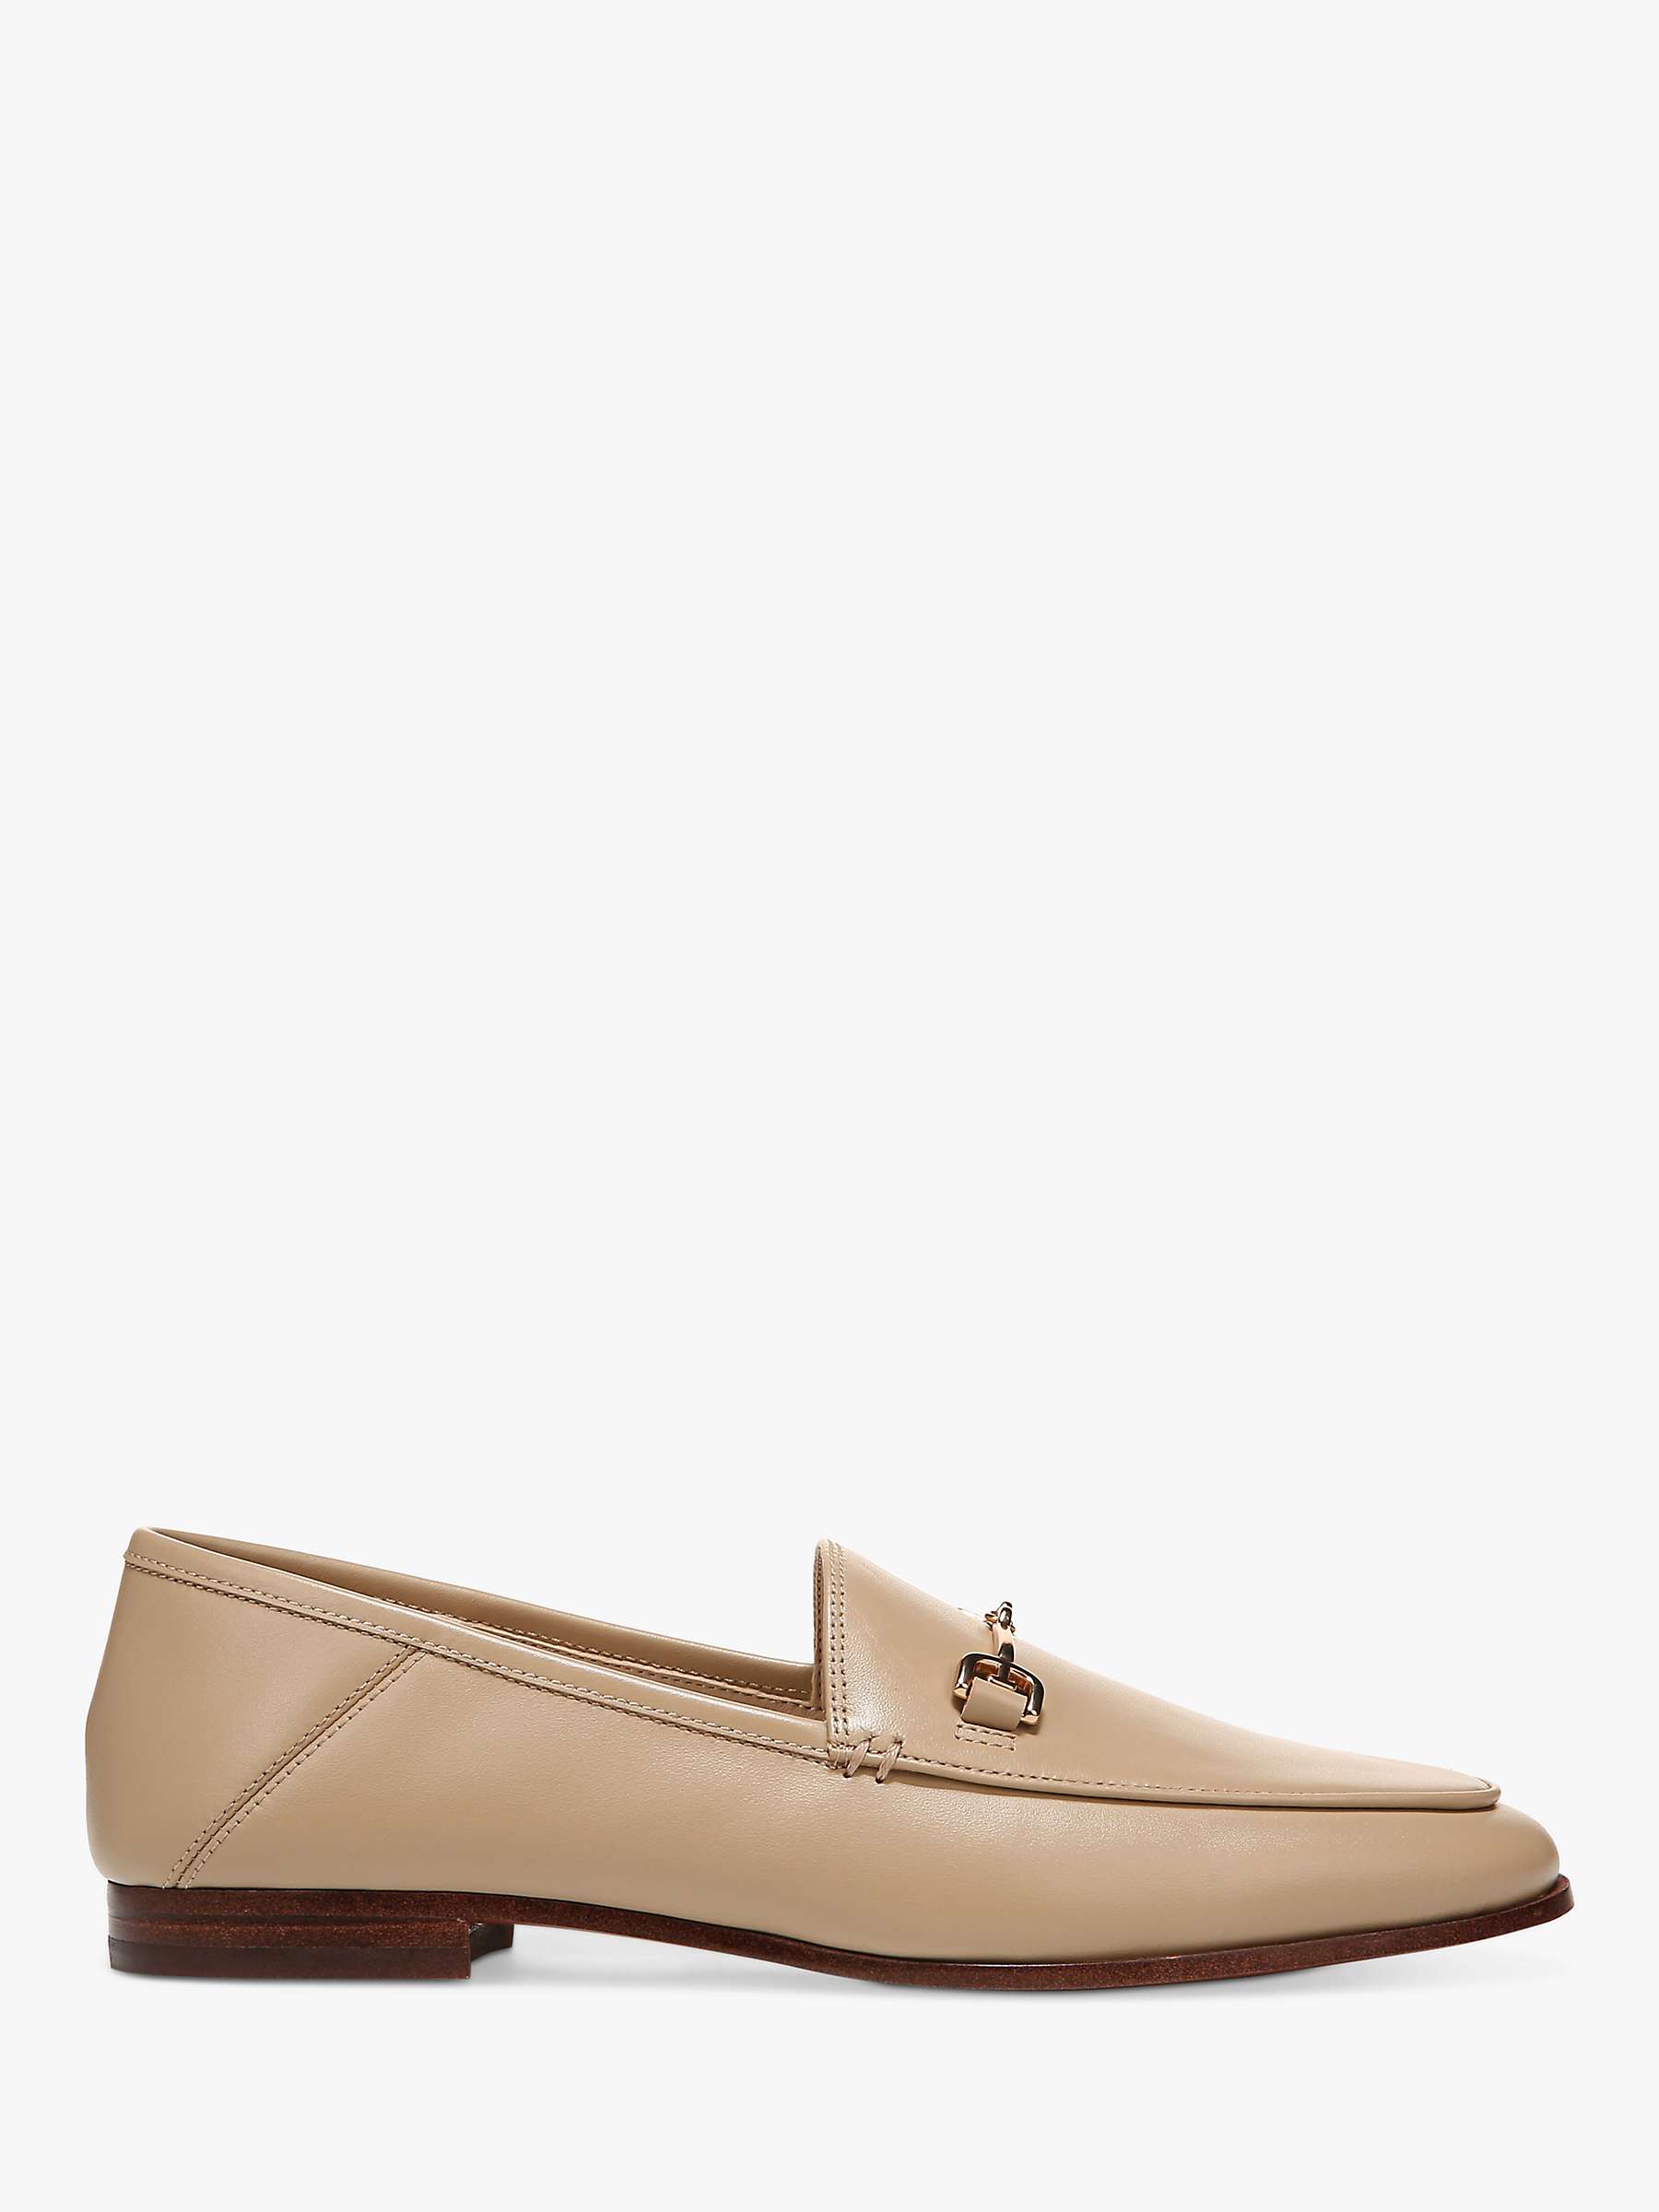 Buy Sam Edelman Loraine Leather Loafers Online at johnlewis.com